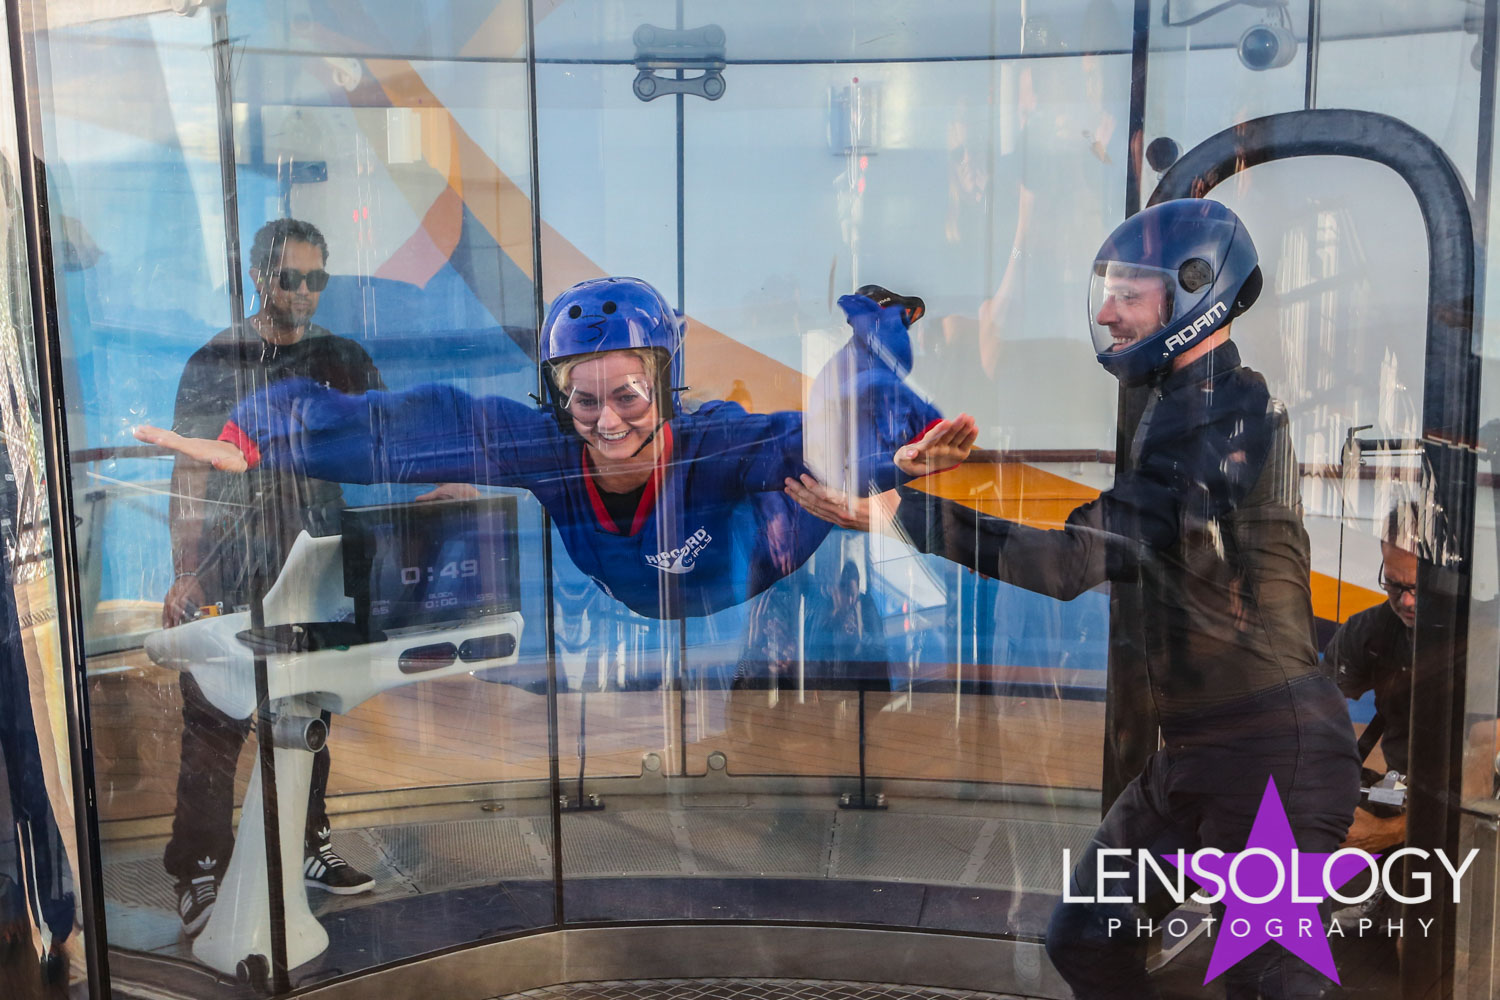 LENSOLOGY.NET - Ripcord iFly photocall with Dancing With The Stars cast members aboard Royal Caribbeans Anthem Of The Seas, New Jersey.
All images are copyright of Lensology.net
Email: info@lensology.net
www.lensology.net